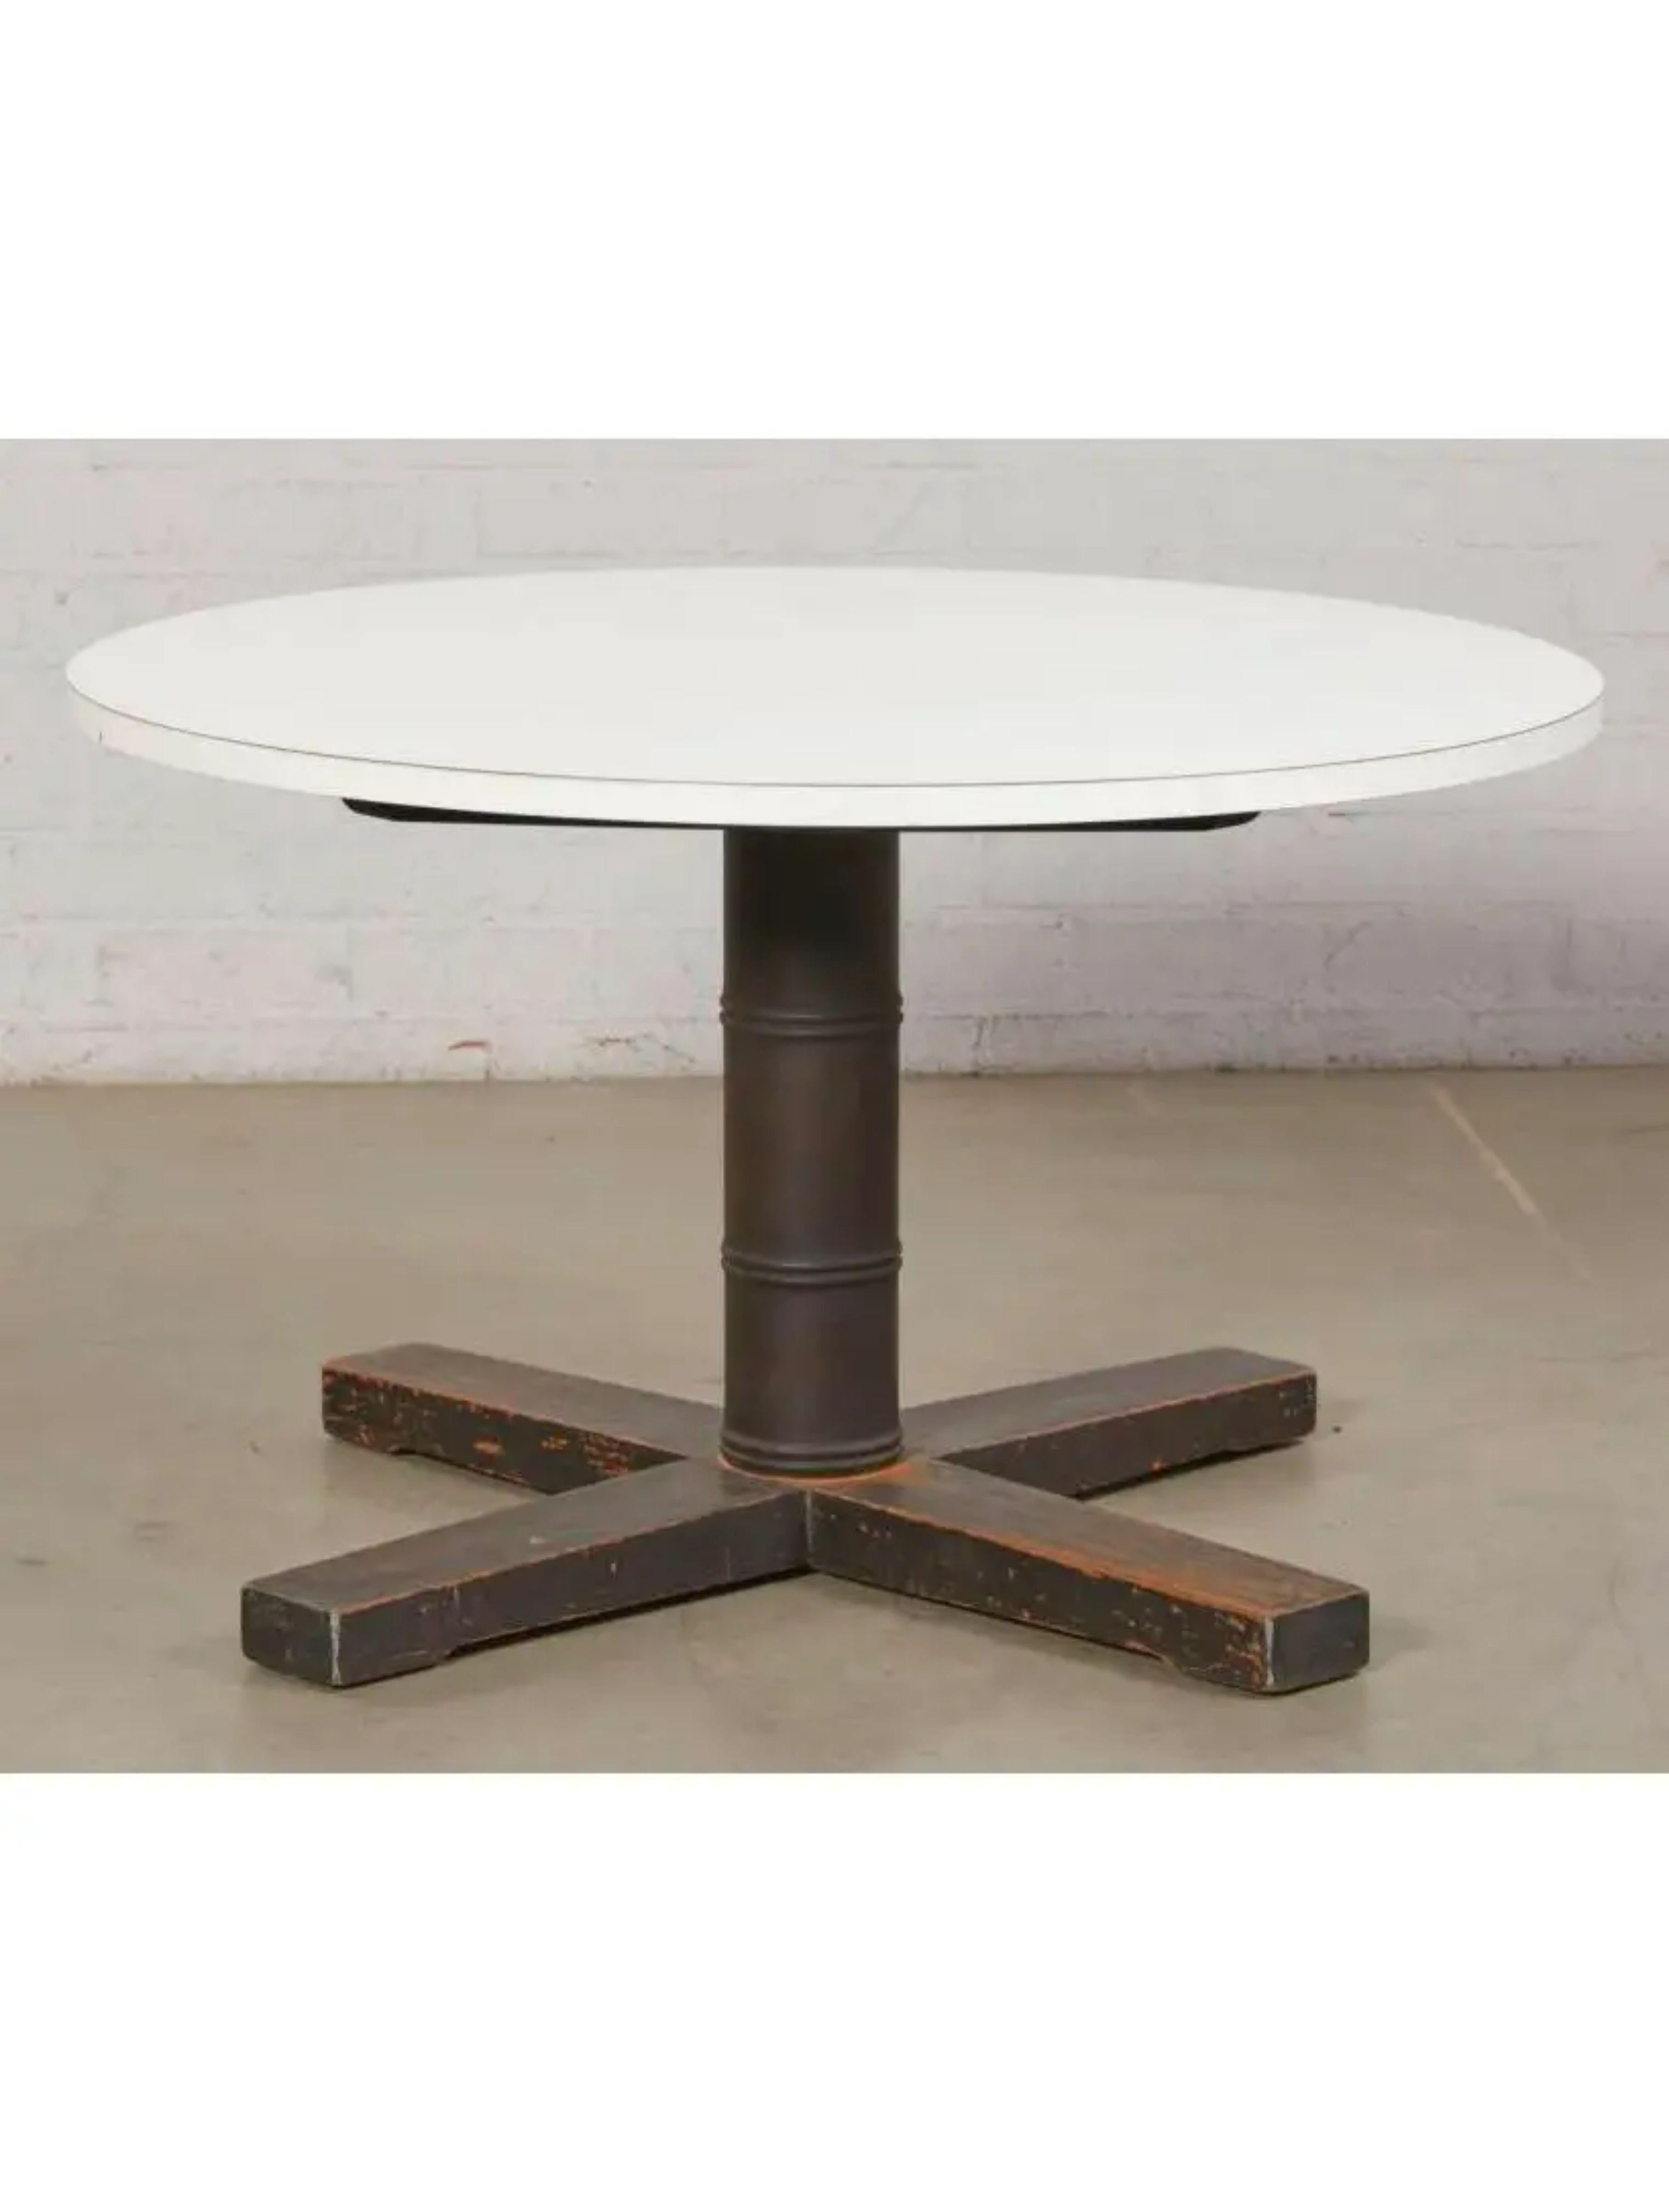 McGuire Furniture Company Pedestal Table. Its a very unusual example with a single faux bamboo pedestal base and a white top. Bares brass plaque 